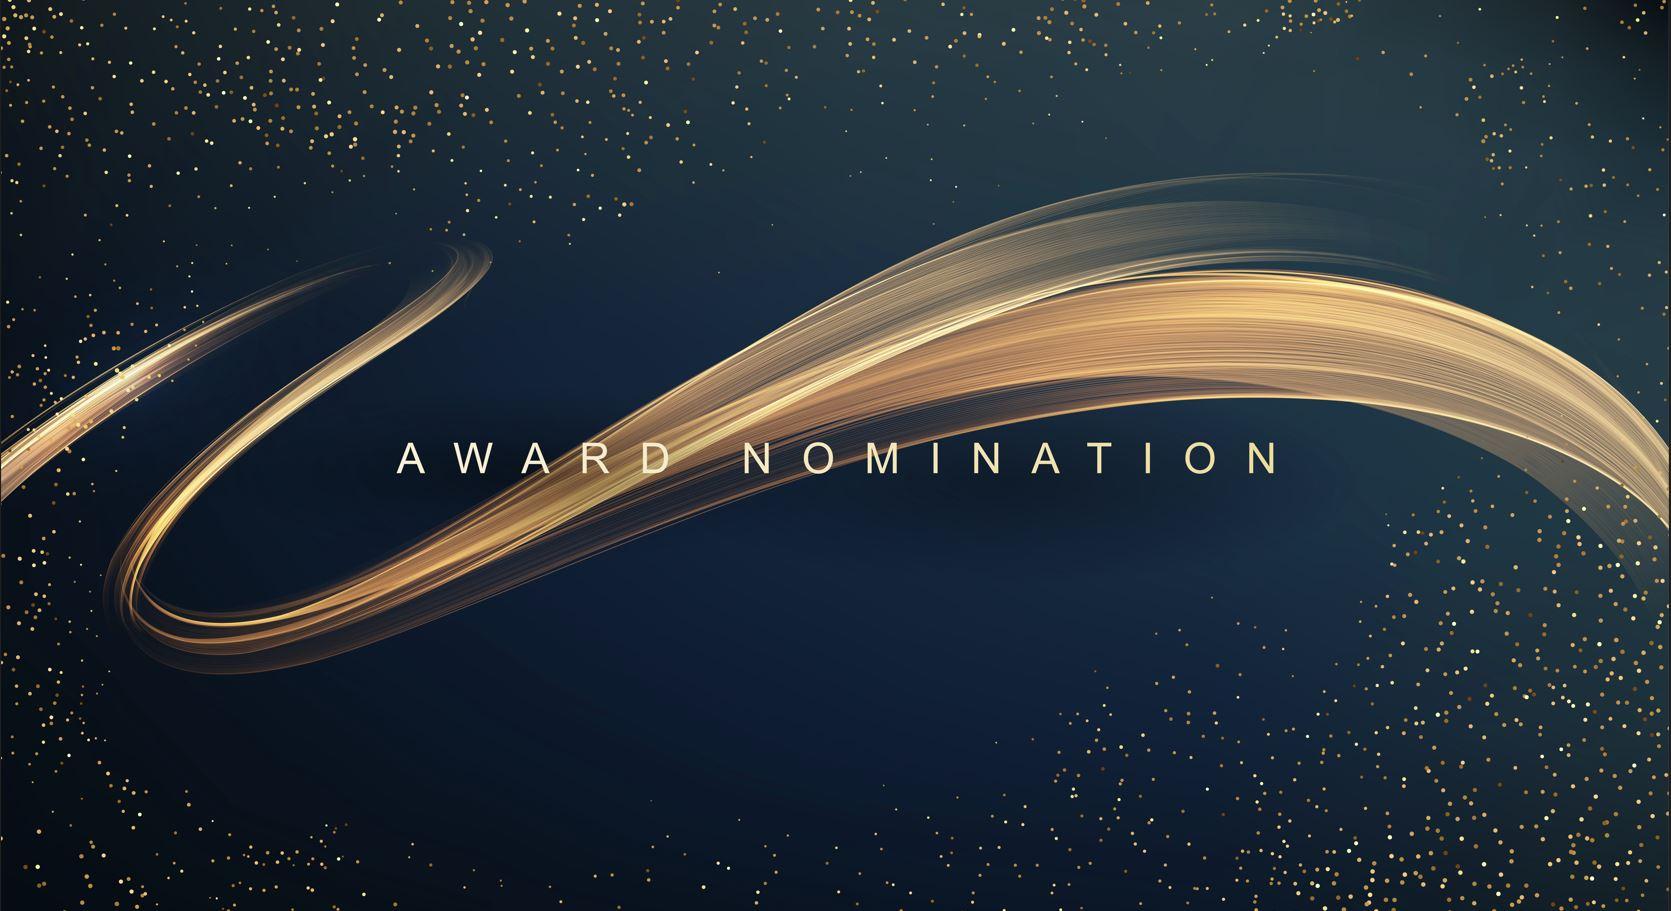 Nominations are open now